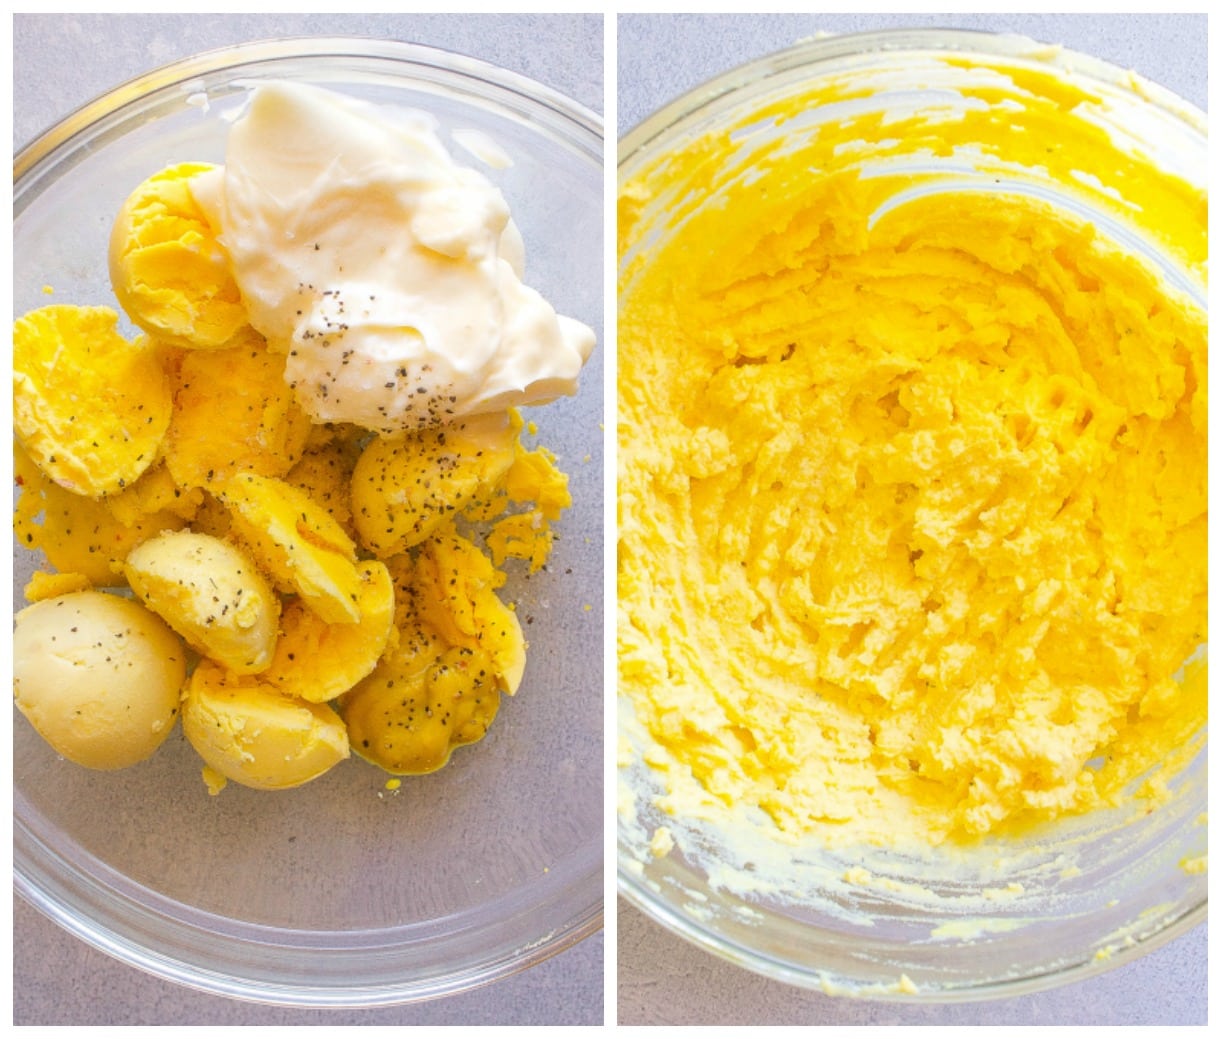 deviled egg yolk mixture in a clear bowl